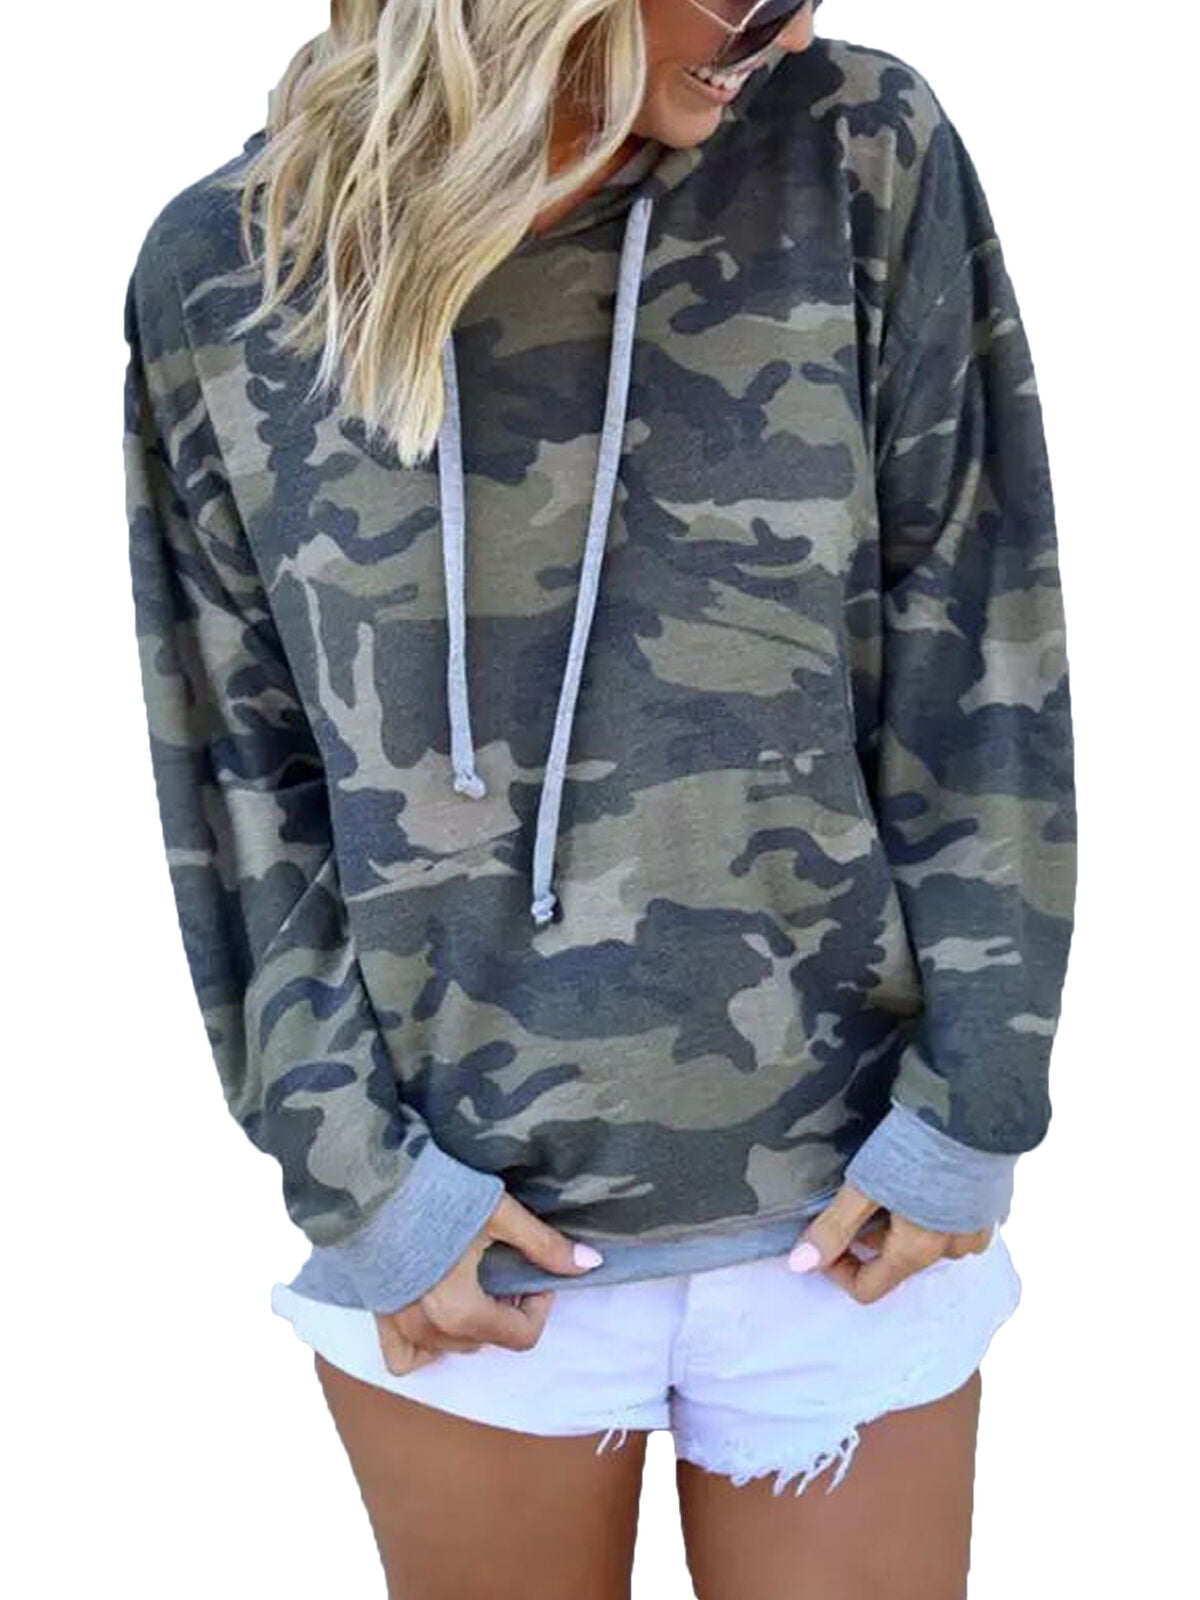 Lmx+3f Casual Womens Camouflage Hooded Pullover Tops Long Sleeve Hoodie Sweatshirt Blouse Loose Soft Comfy Tops 